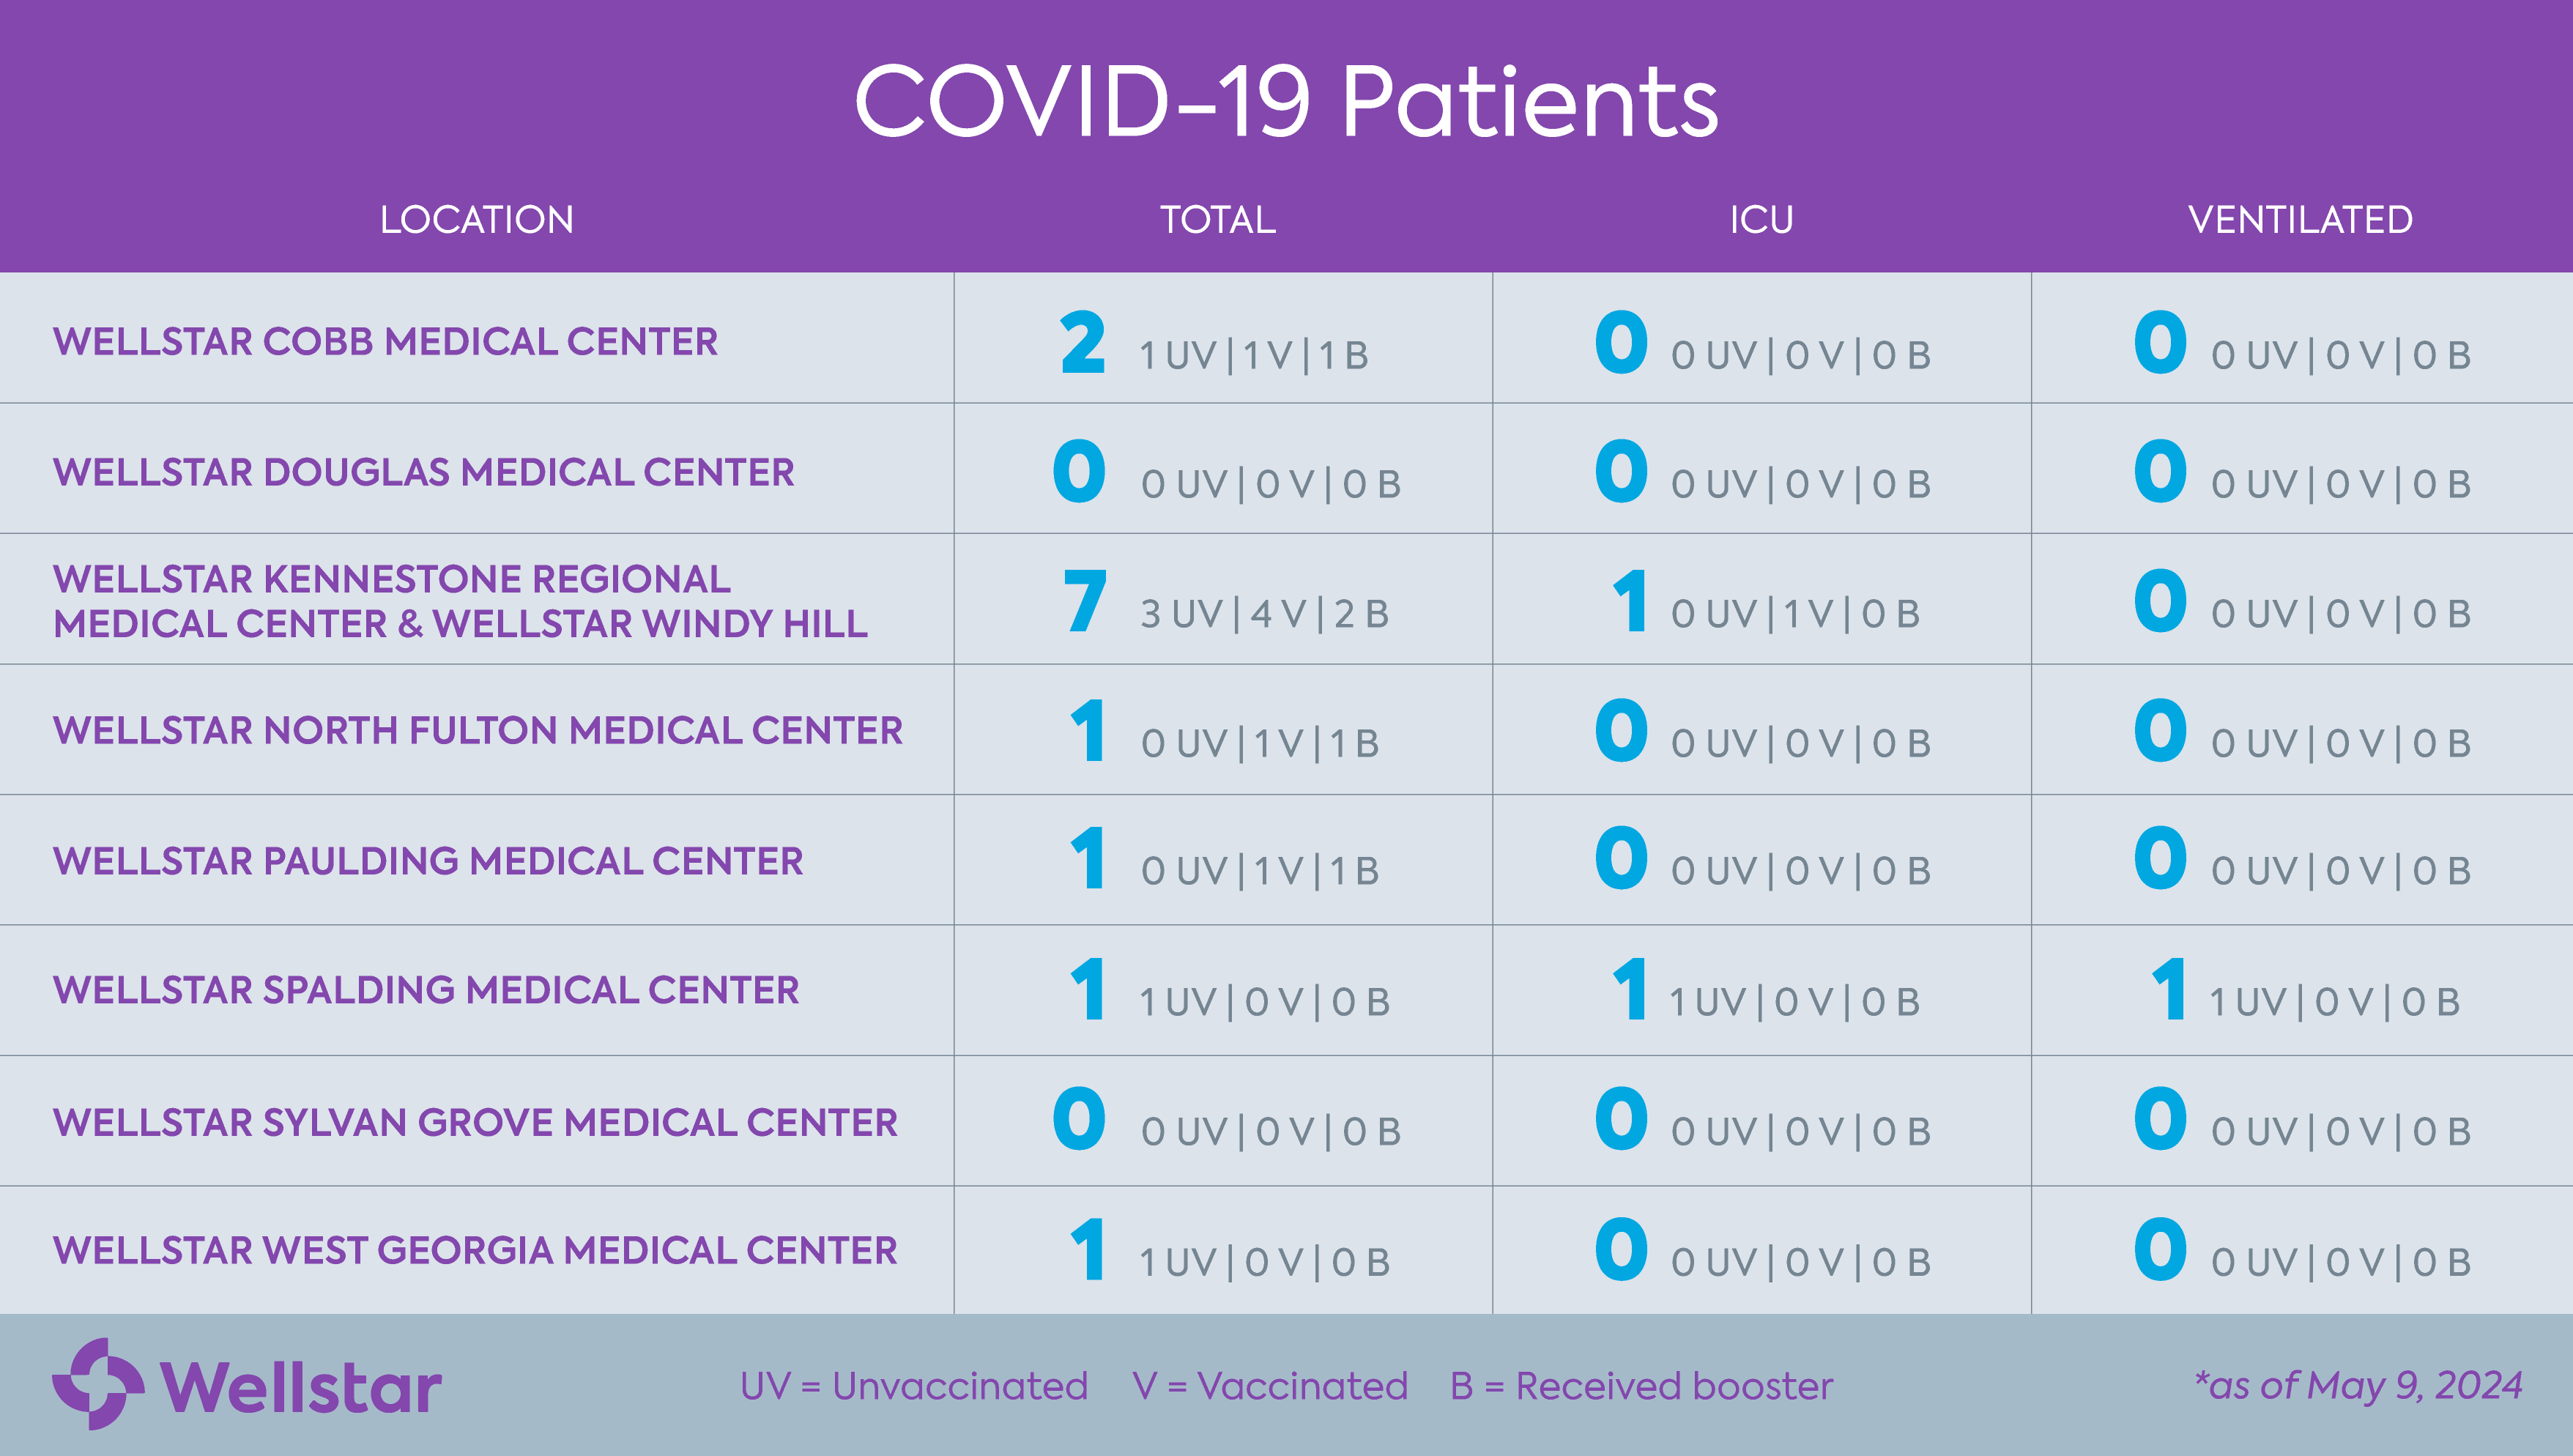 List of all Wellstar hospital locations and their corresponding COVID-19 numbers